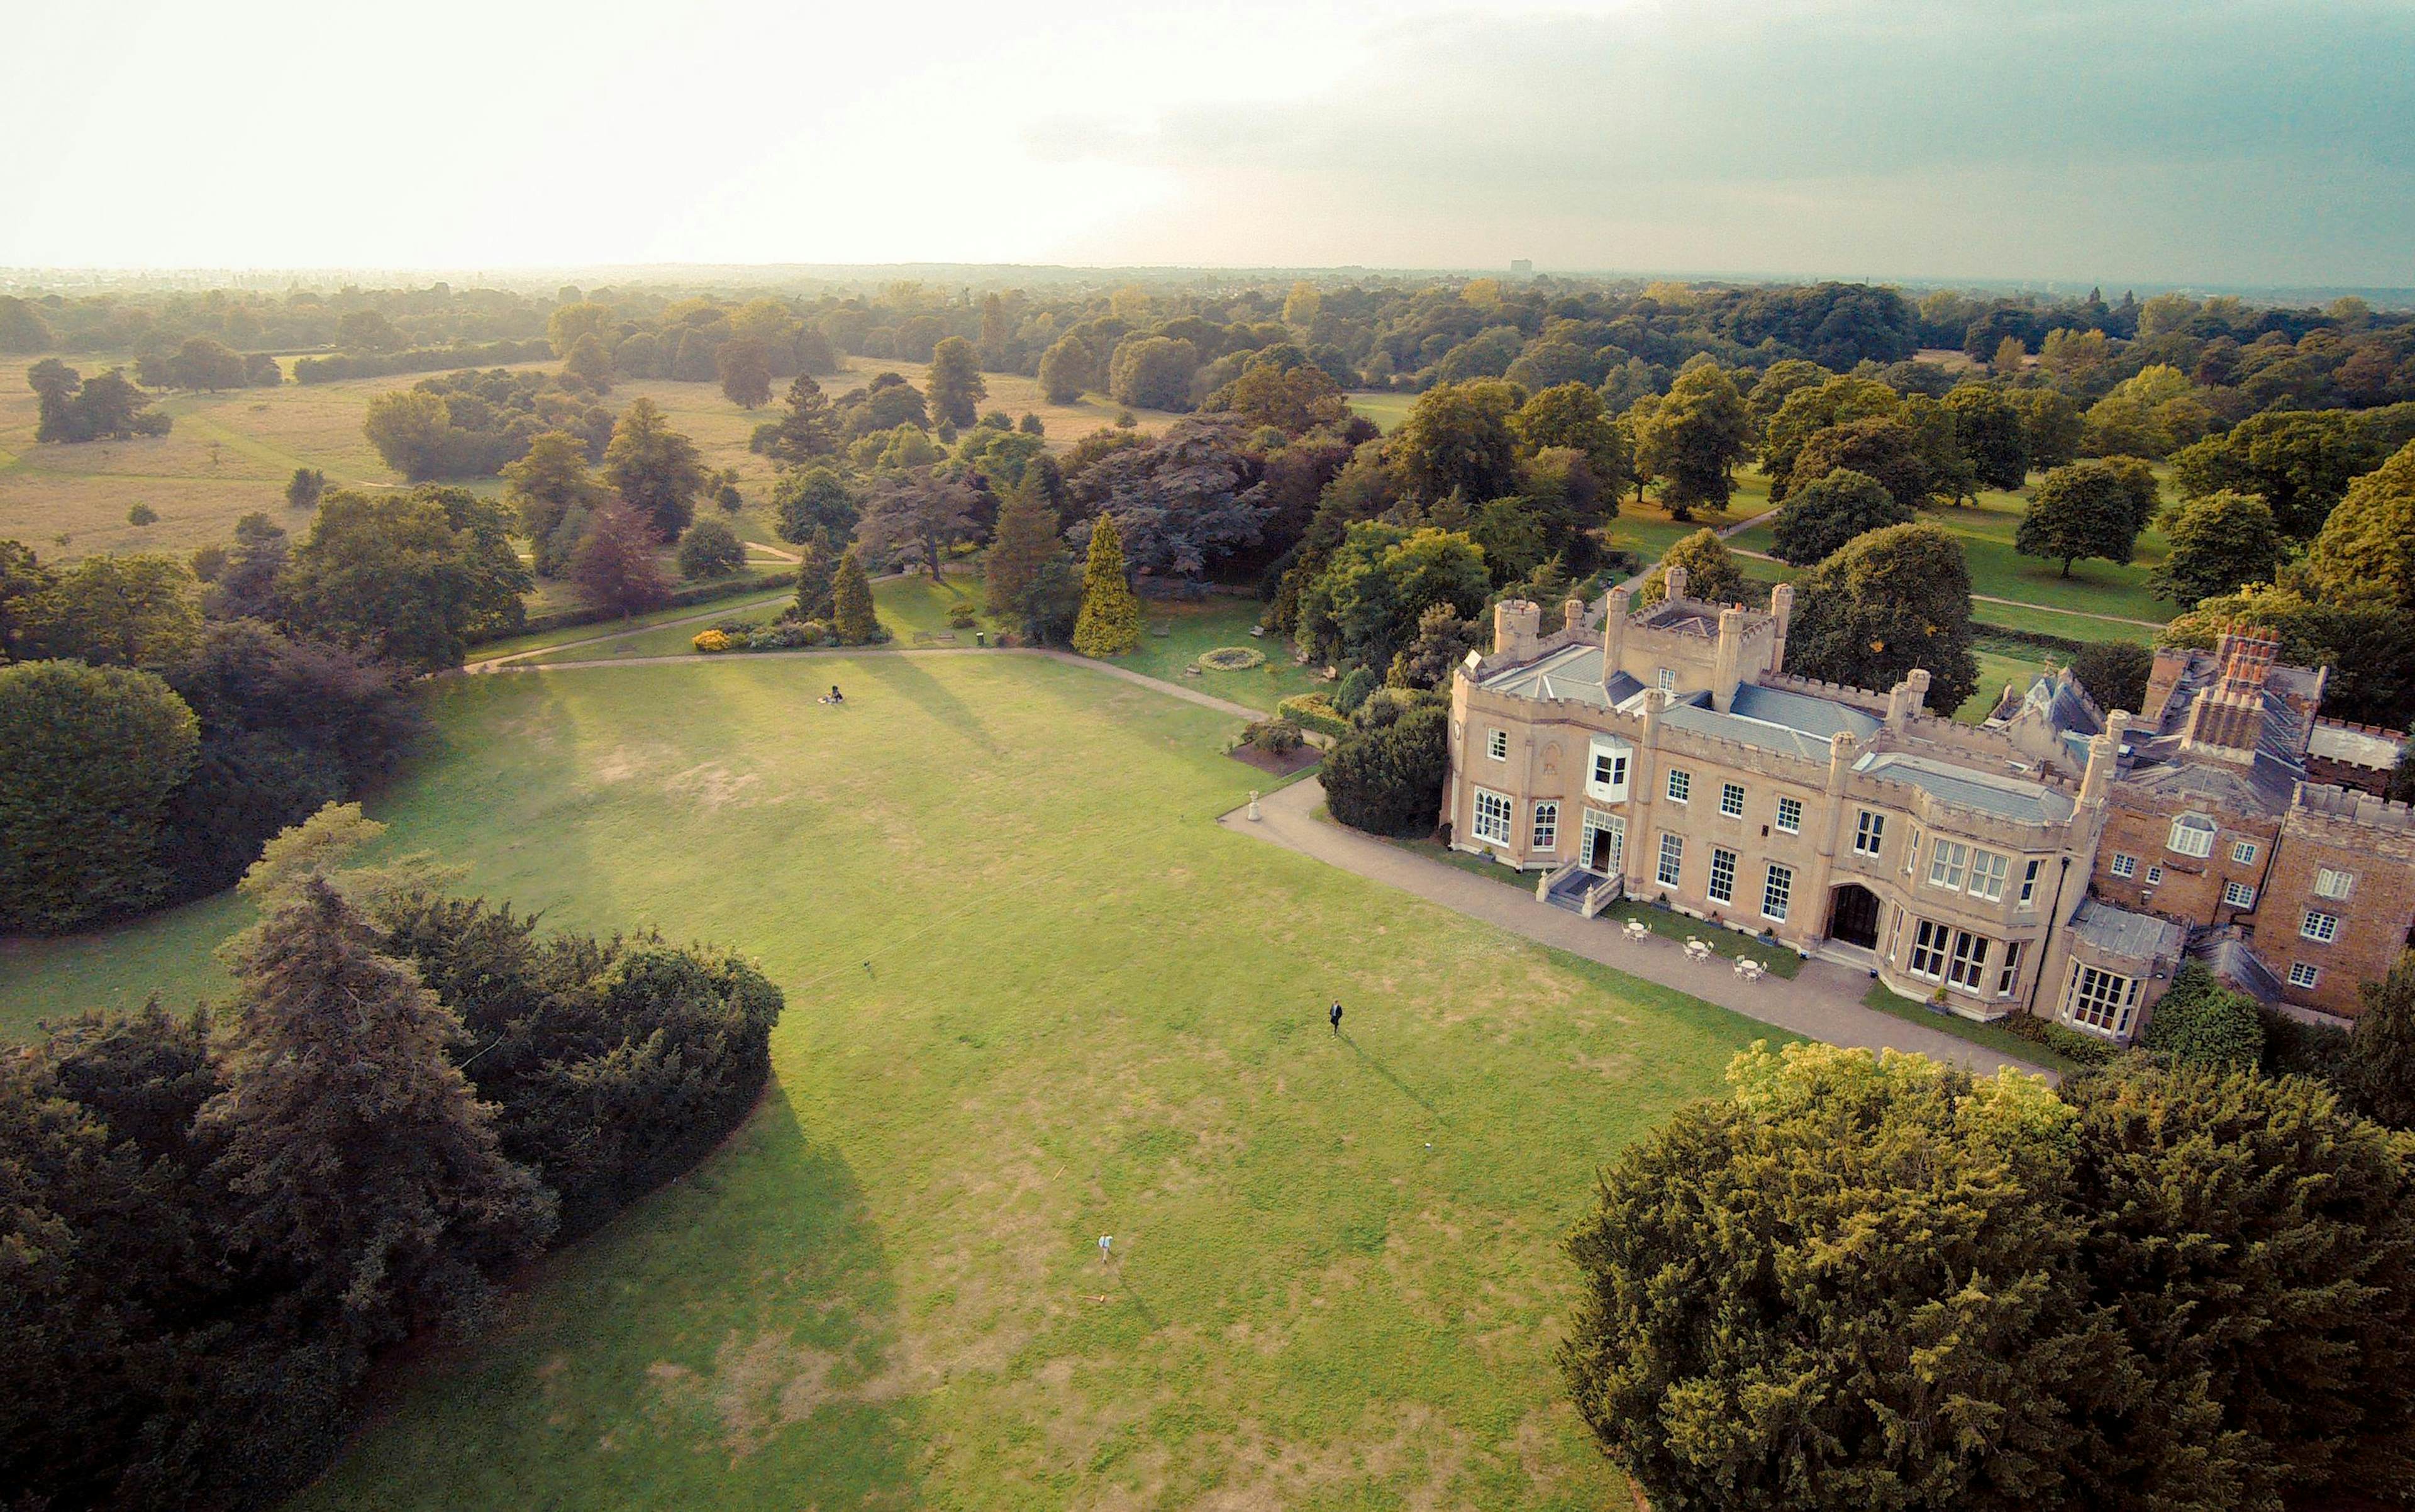 Nonsuch Mansion - The Whole Venue image 1